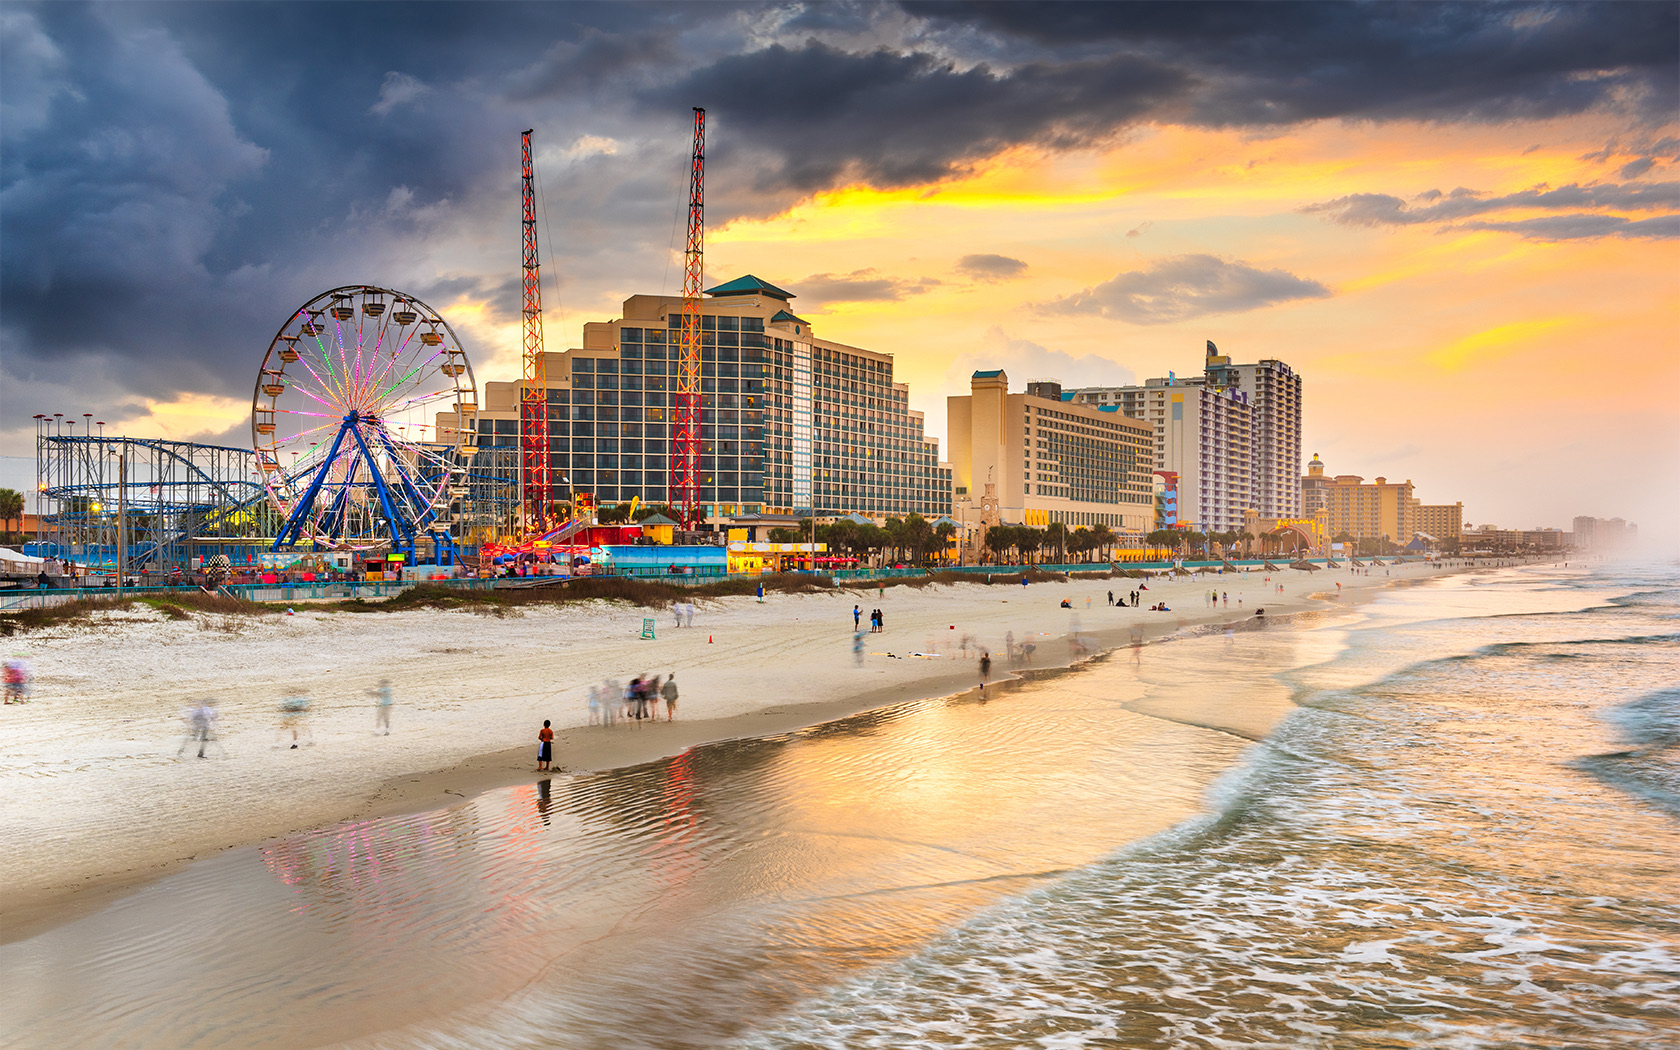 Many tall buildings and amusement rides next to the beach at sunset.